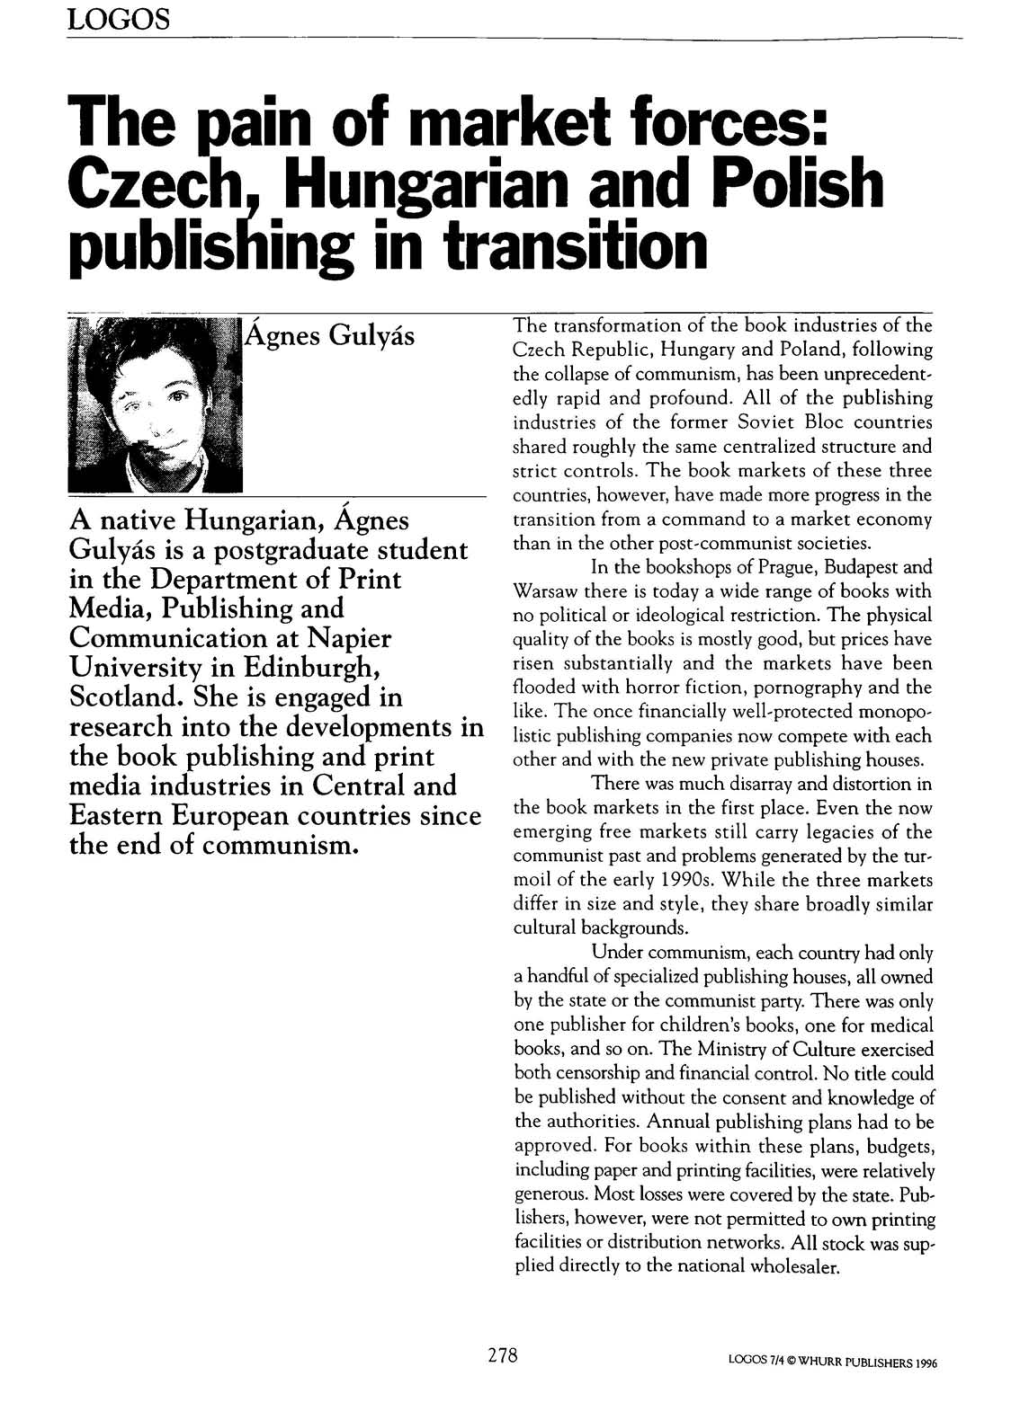 Czech, Hungarian and Polish Publishing in Transition